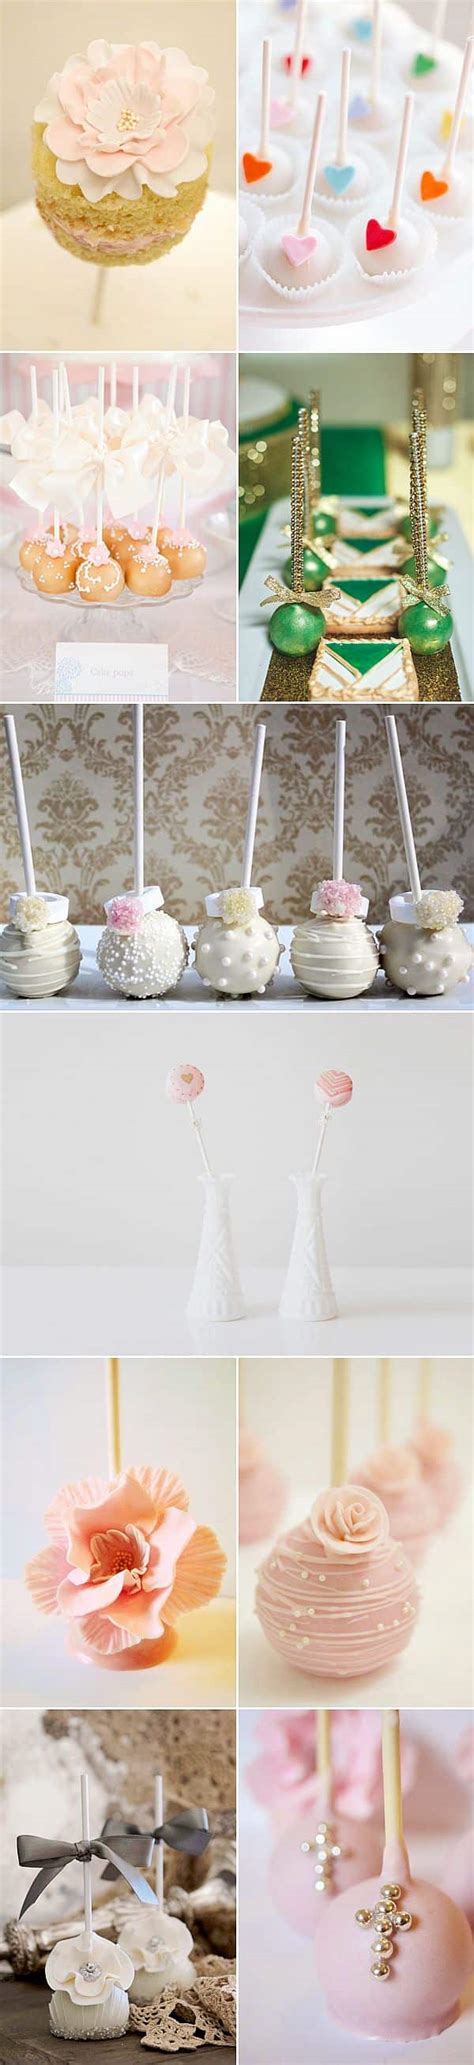 Easy Guide To Making Awesome Cake Pops Video